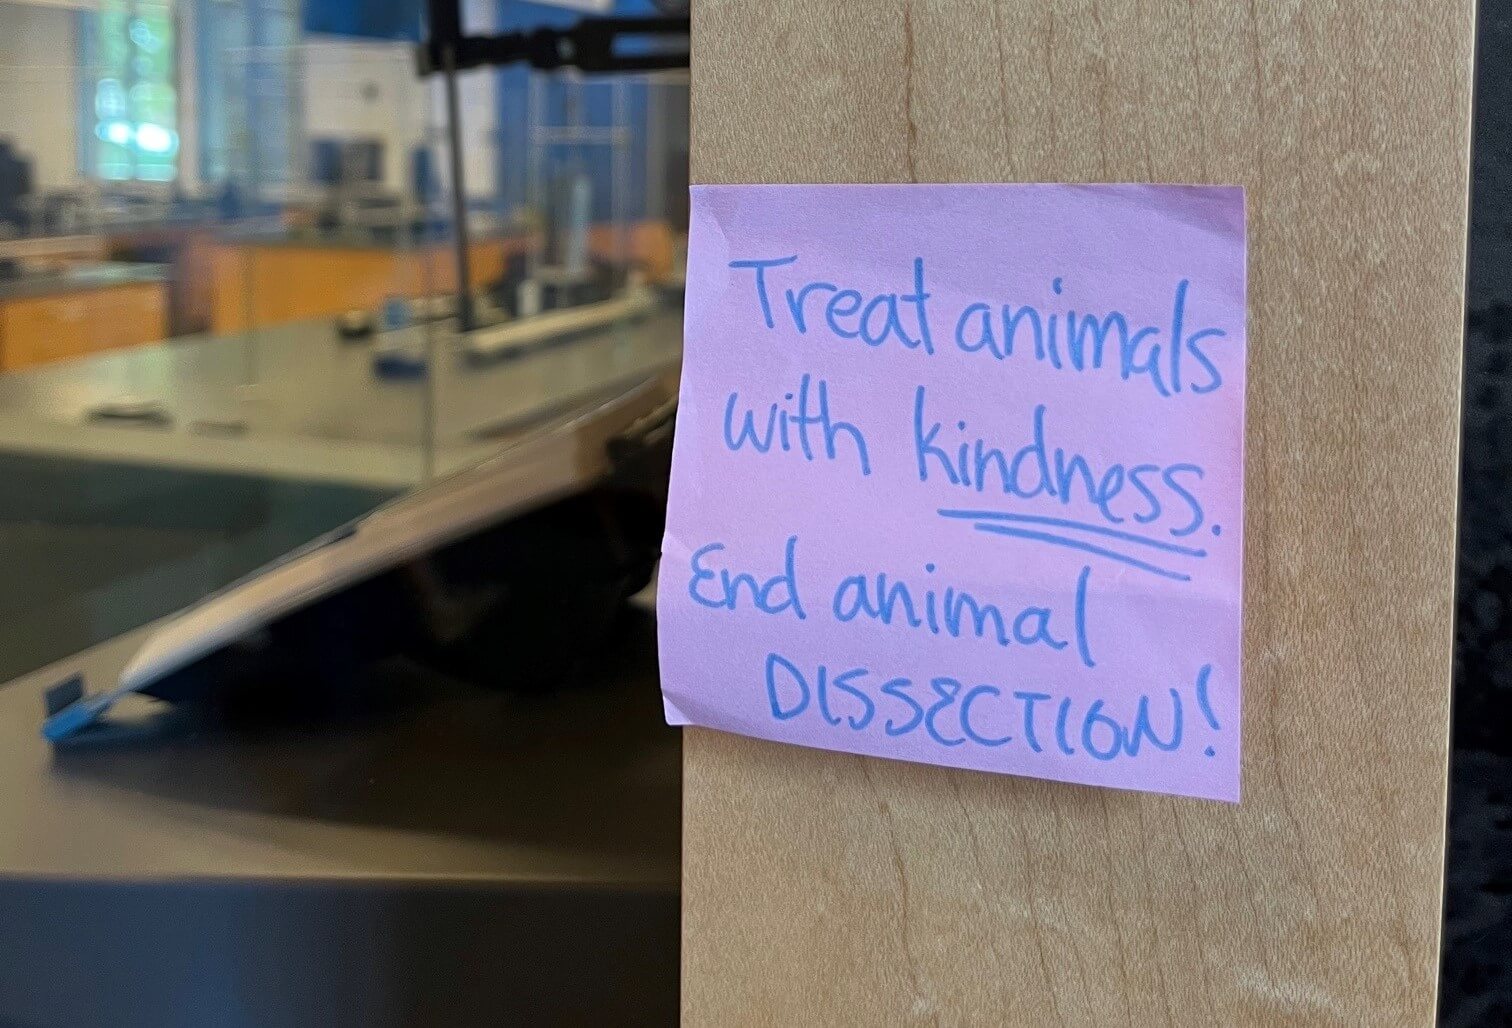 PETA-owned image of a dissection sticky note from Katharine H